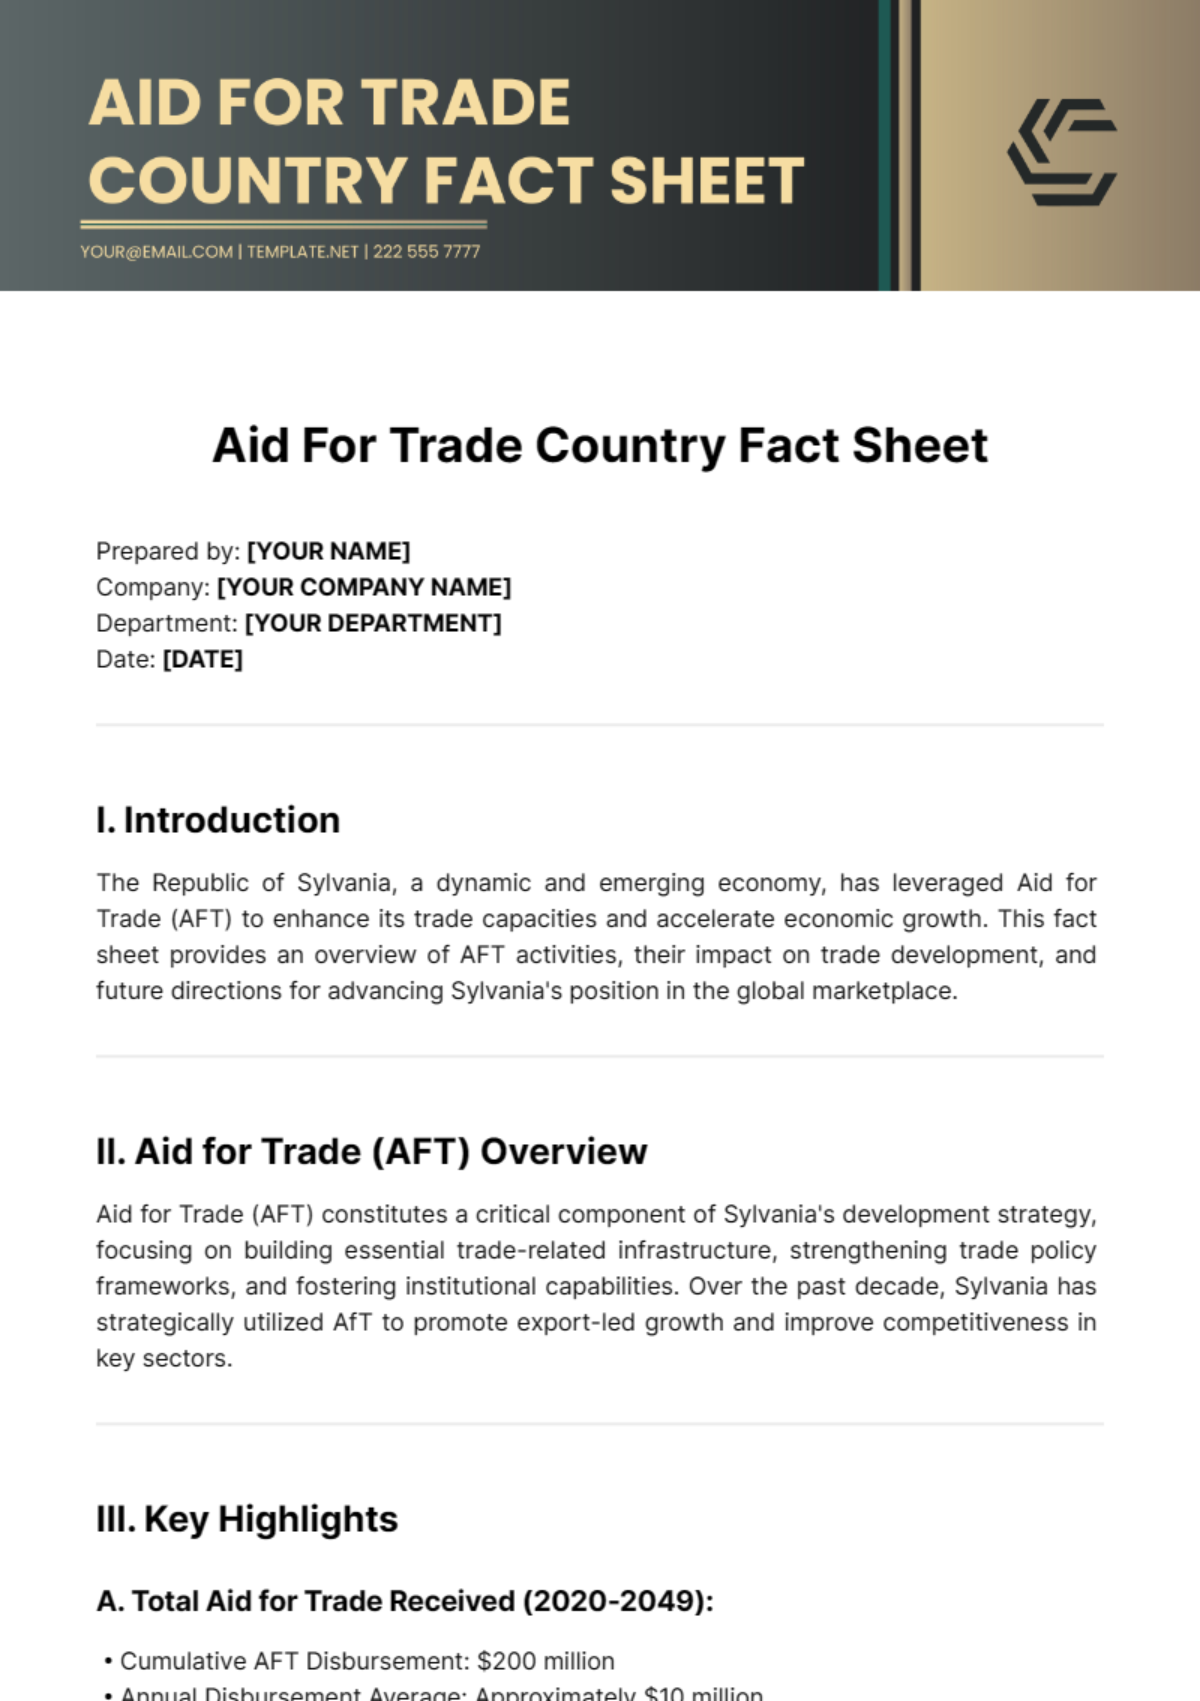 Aid For Trade Country Fact Sheet Template